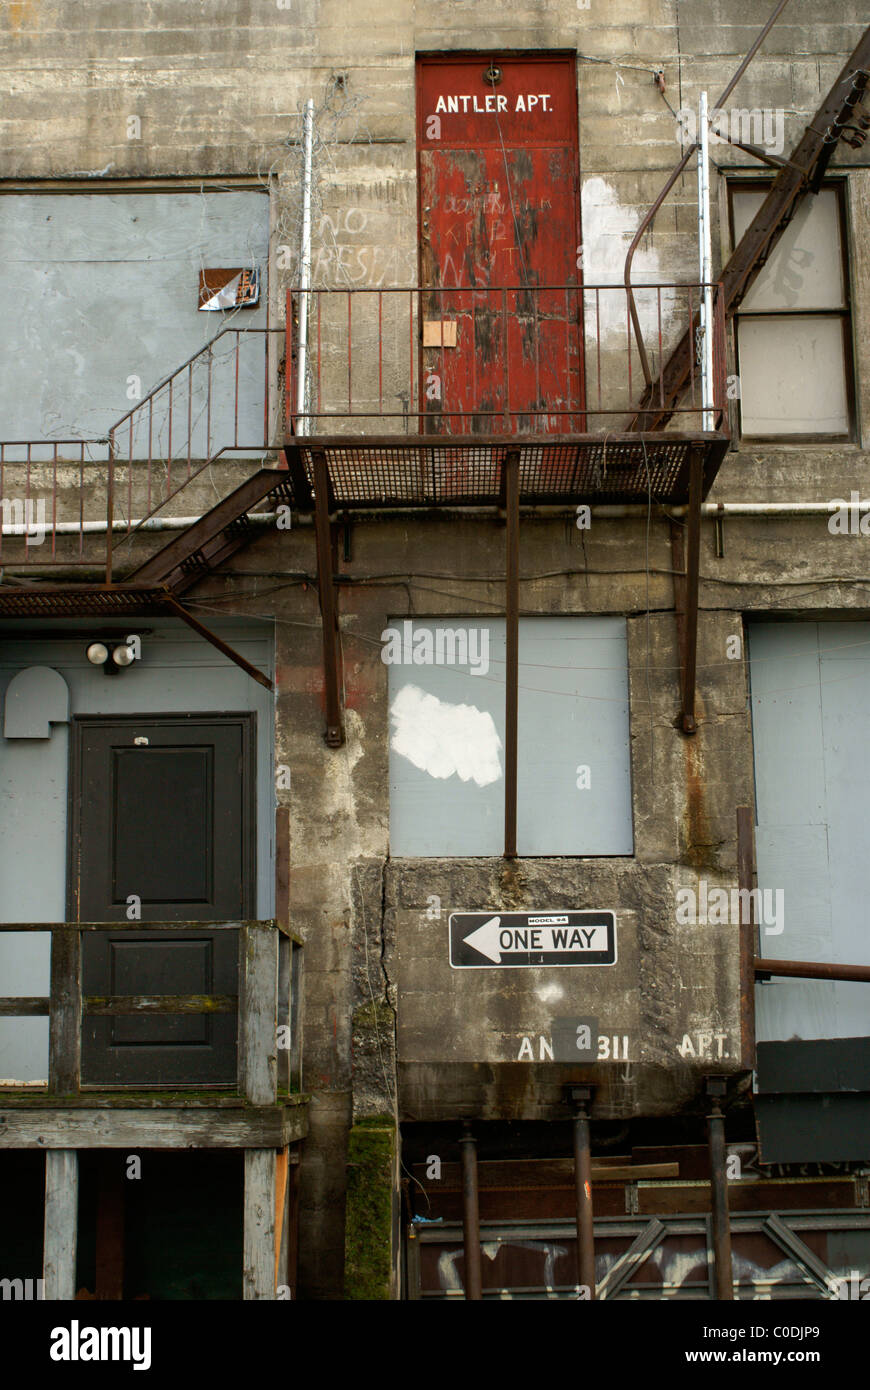 Rear view of a dilapidated building and a metal fire escape, Bellingham, Washington State, USA Stock Photo